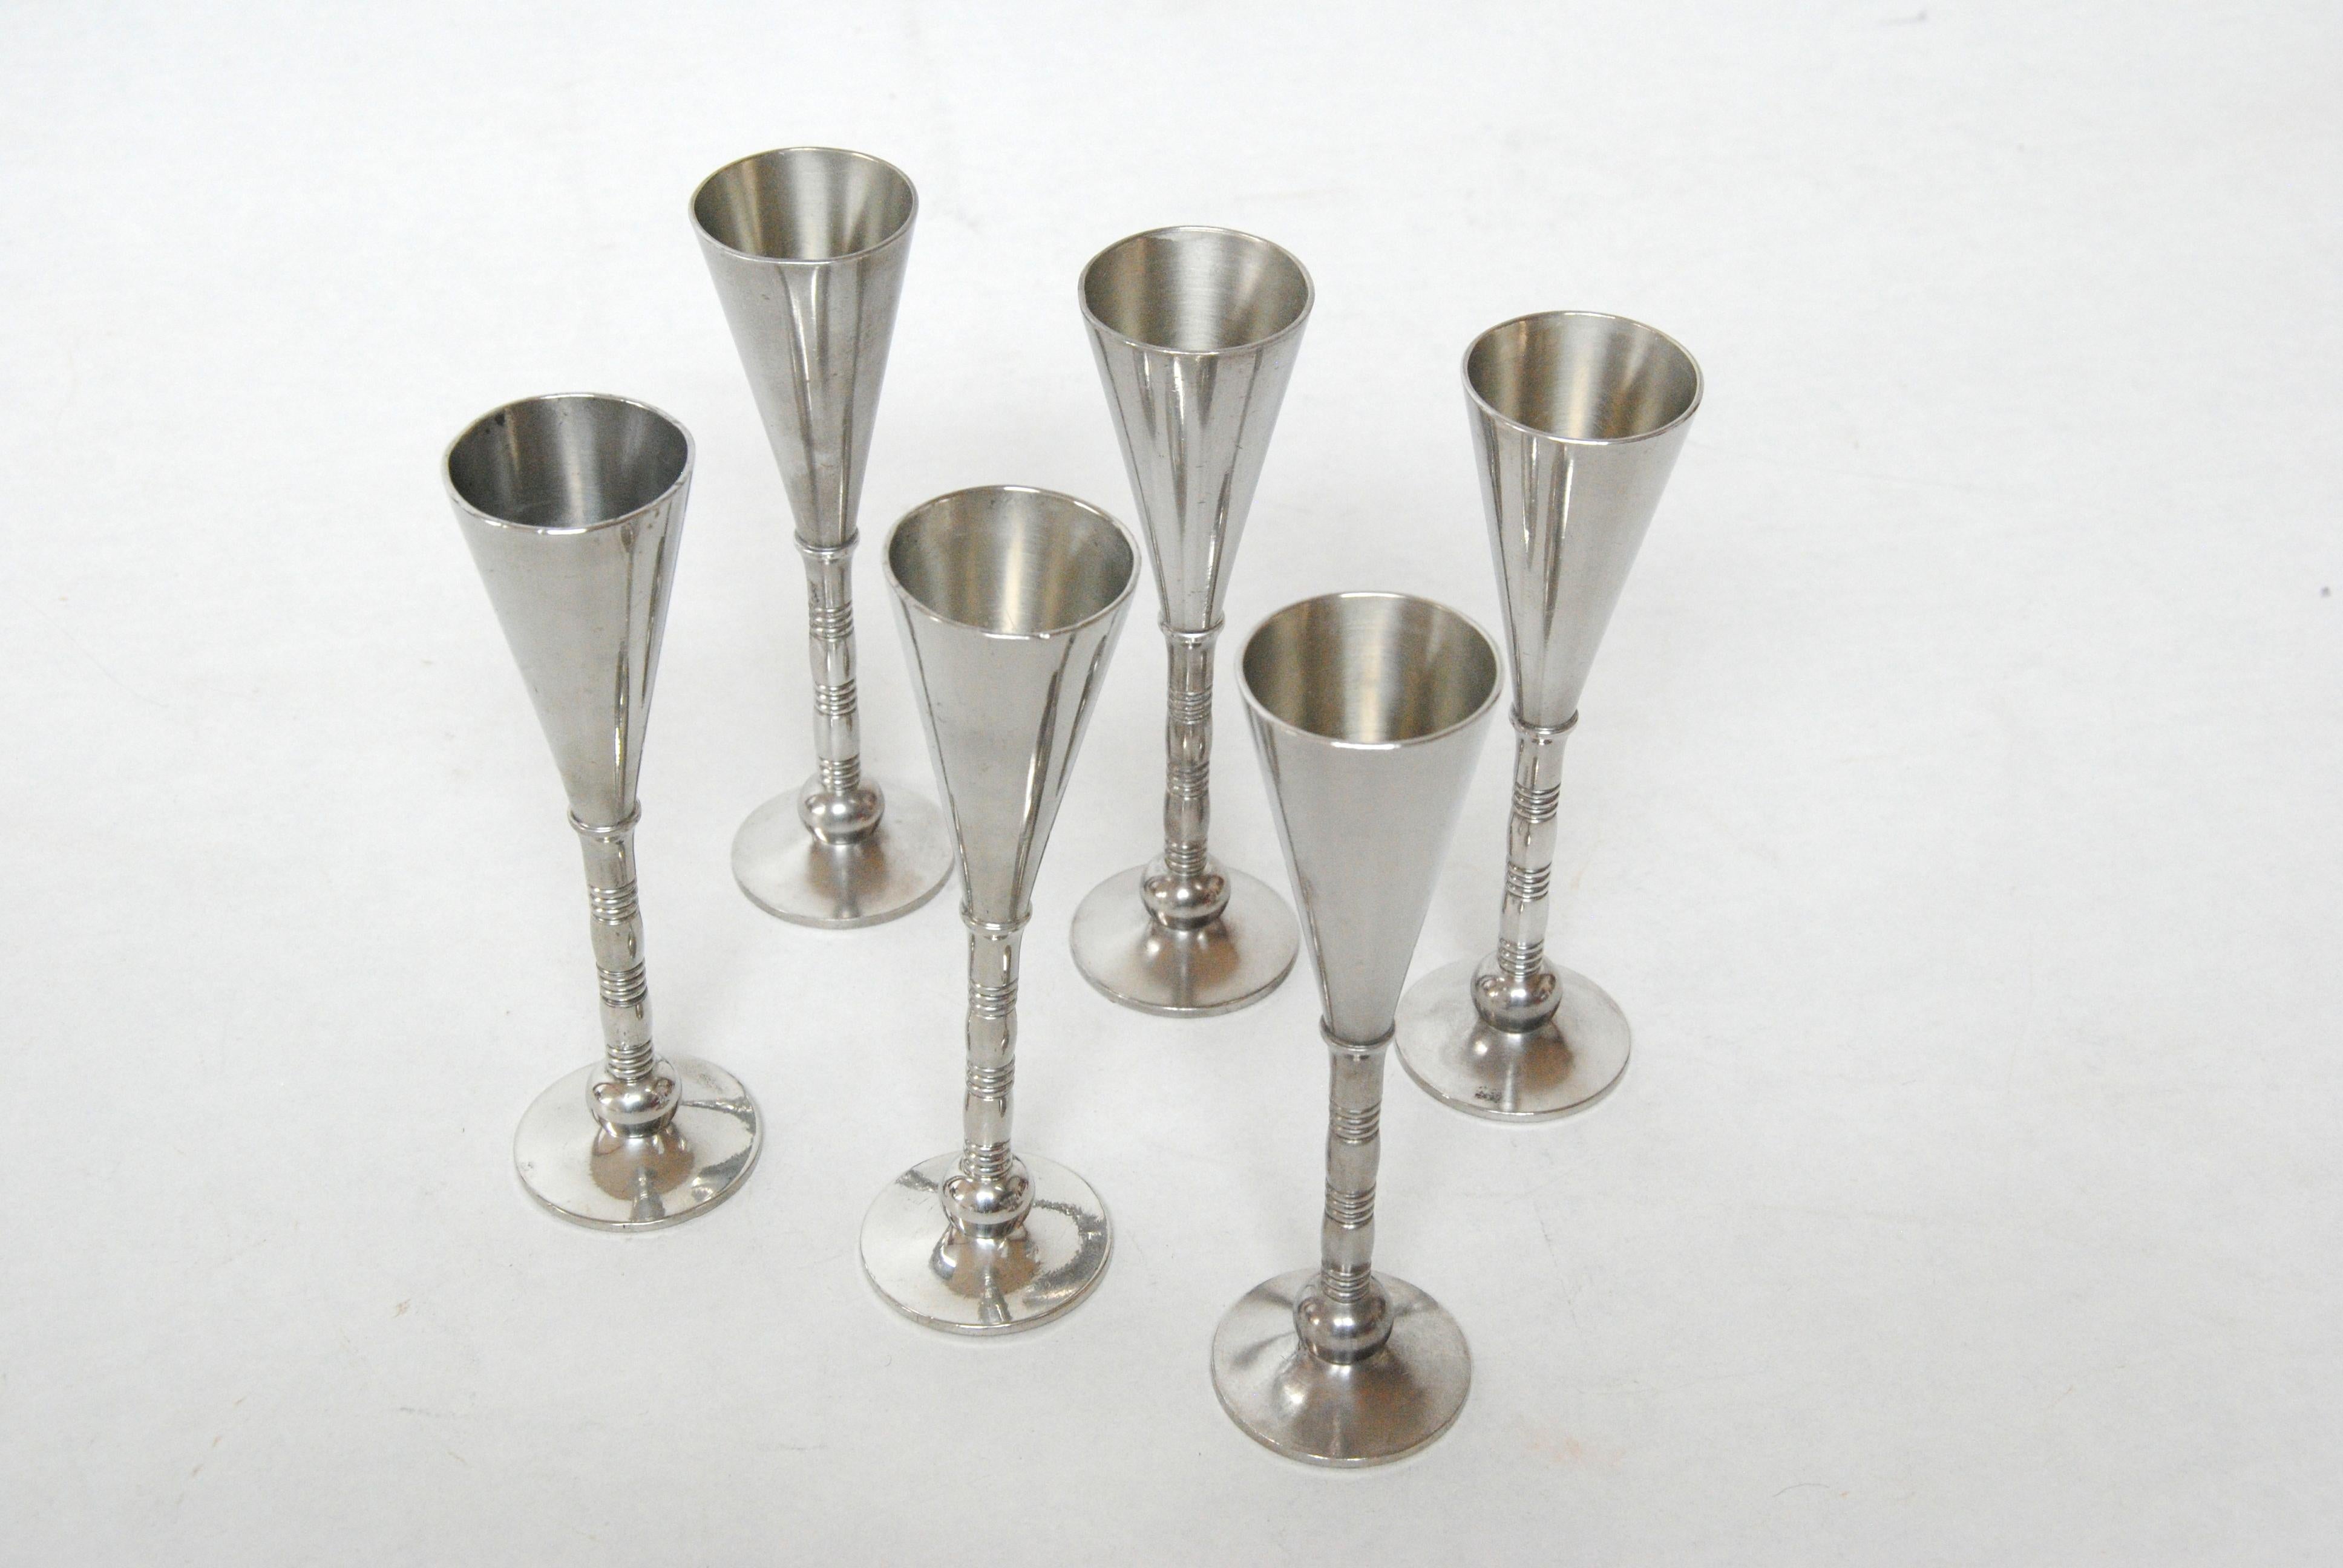 1940´s Danish Just Andersen set of six pewter schnapss liquor goblets.

Stylish vintage Schnapss Liquor Goblets in very good vintage condition that after 80 years will still do very well in your bar cabinet.

Just Andersen 1884-1943 was born in